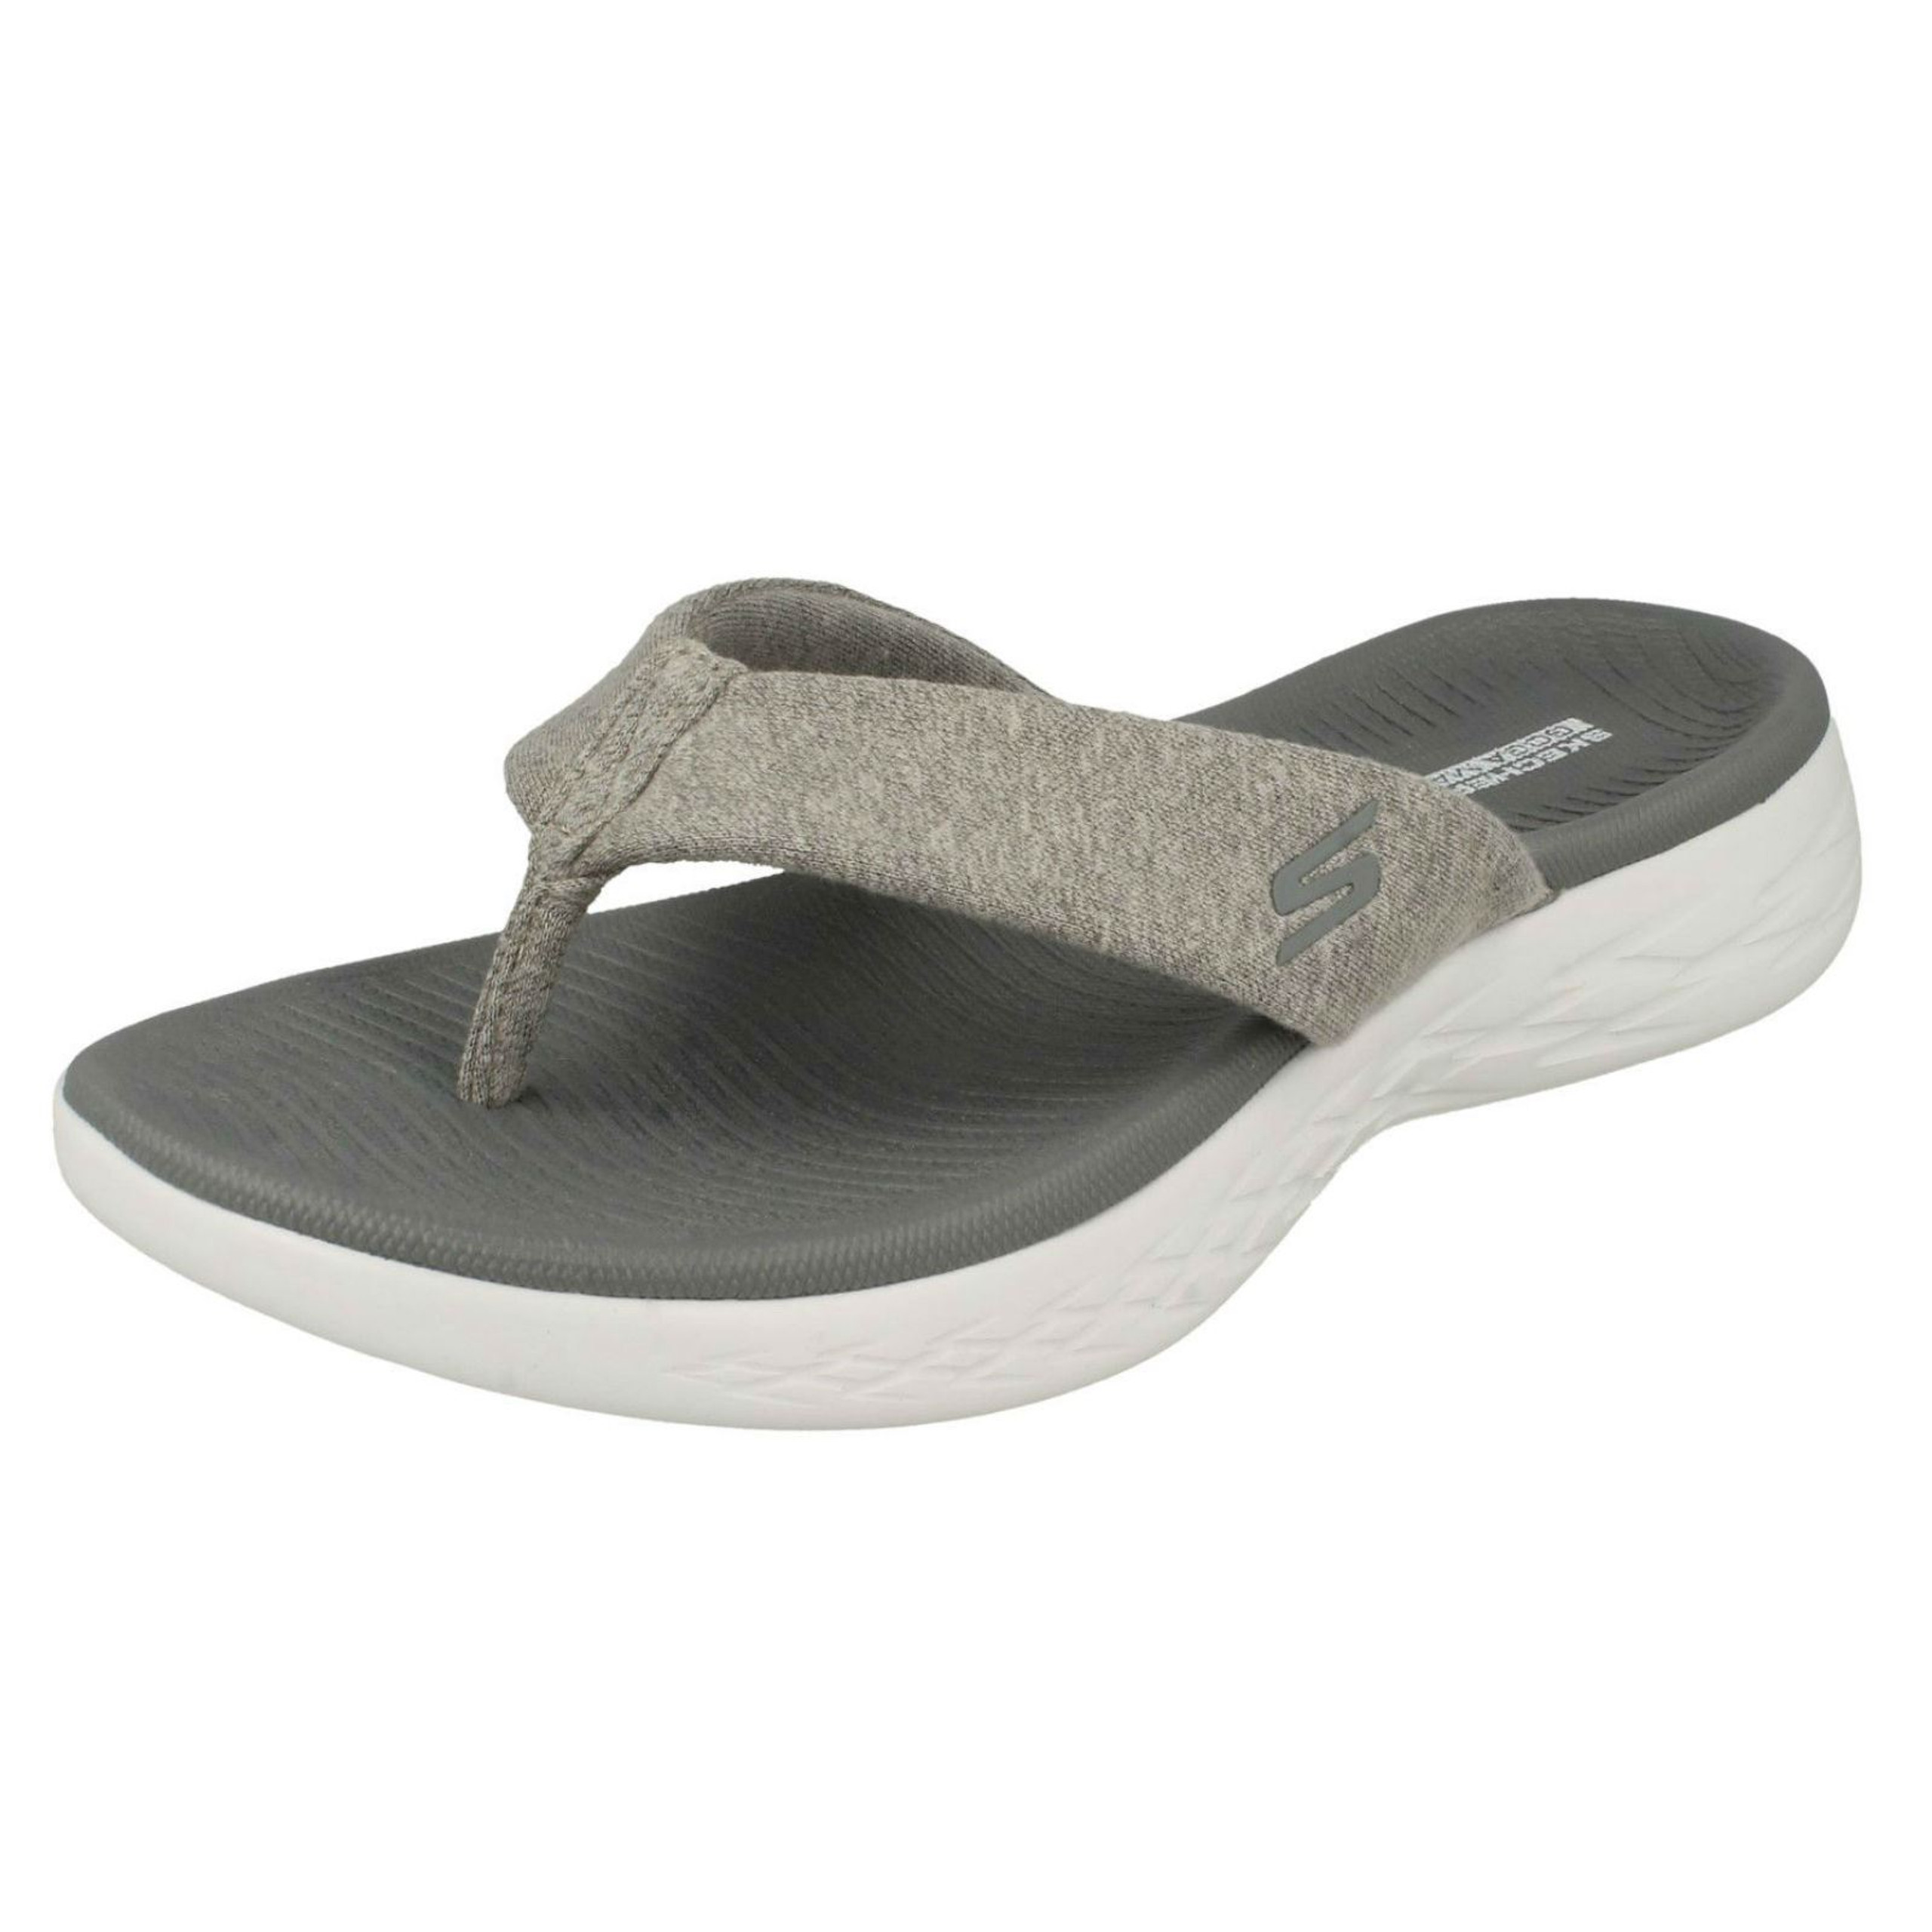 Ladies Skechers On The Go Toe Post Sandals Best Liked 16154